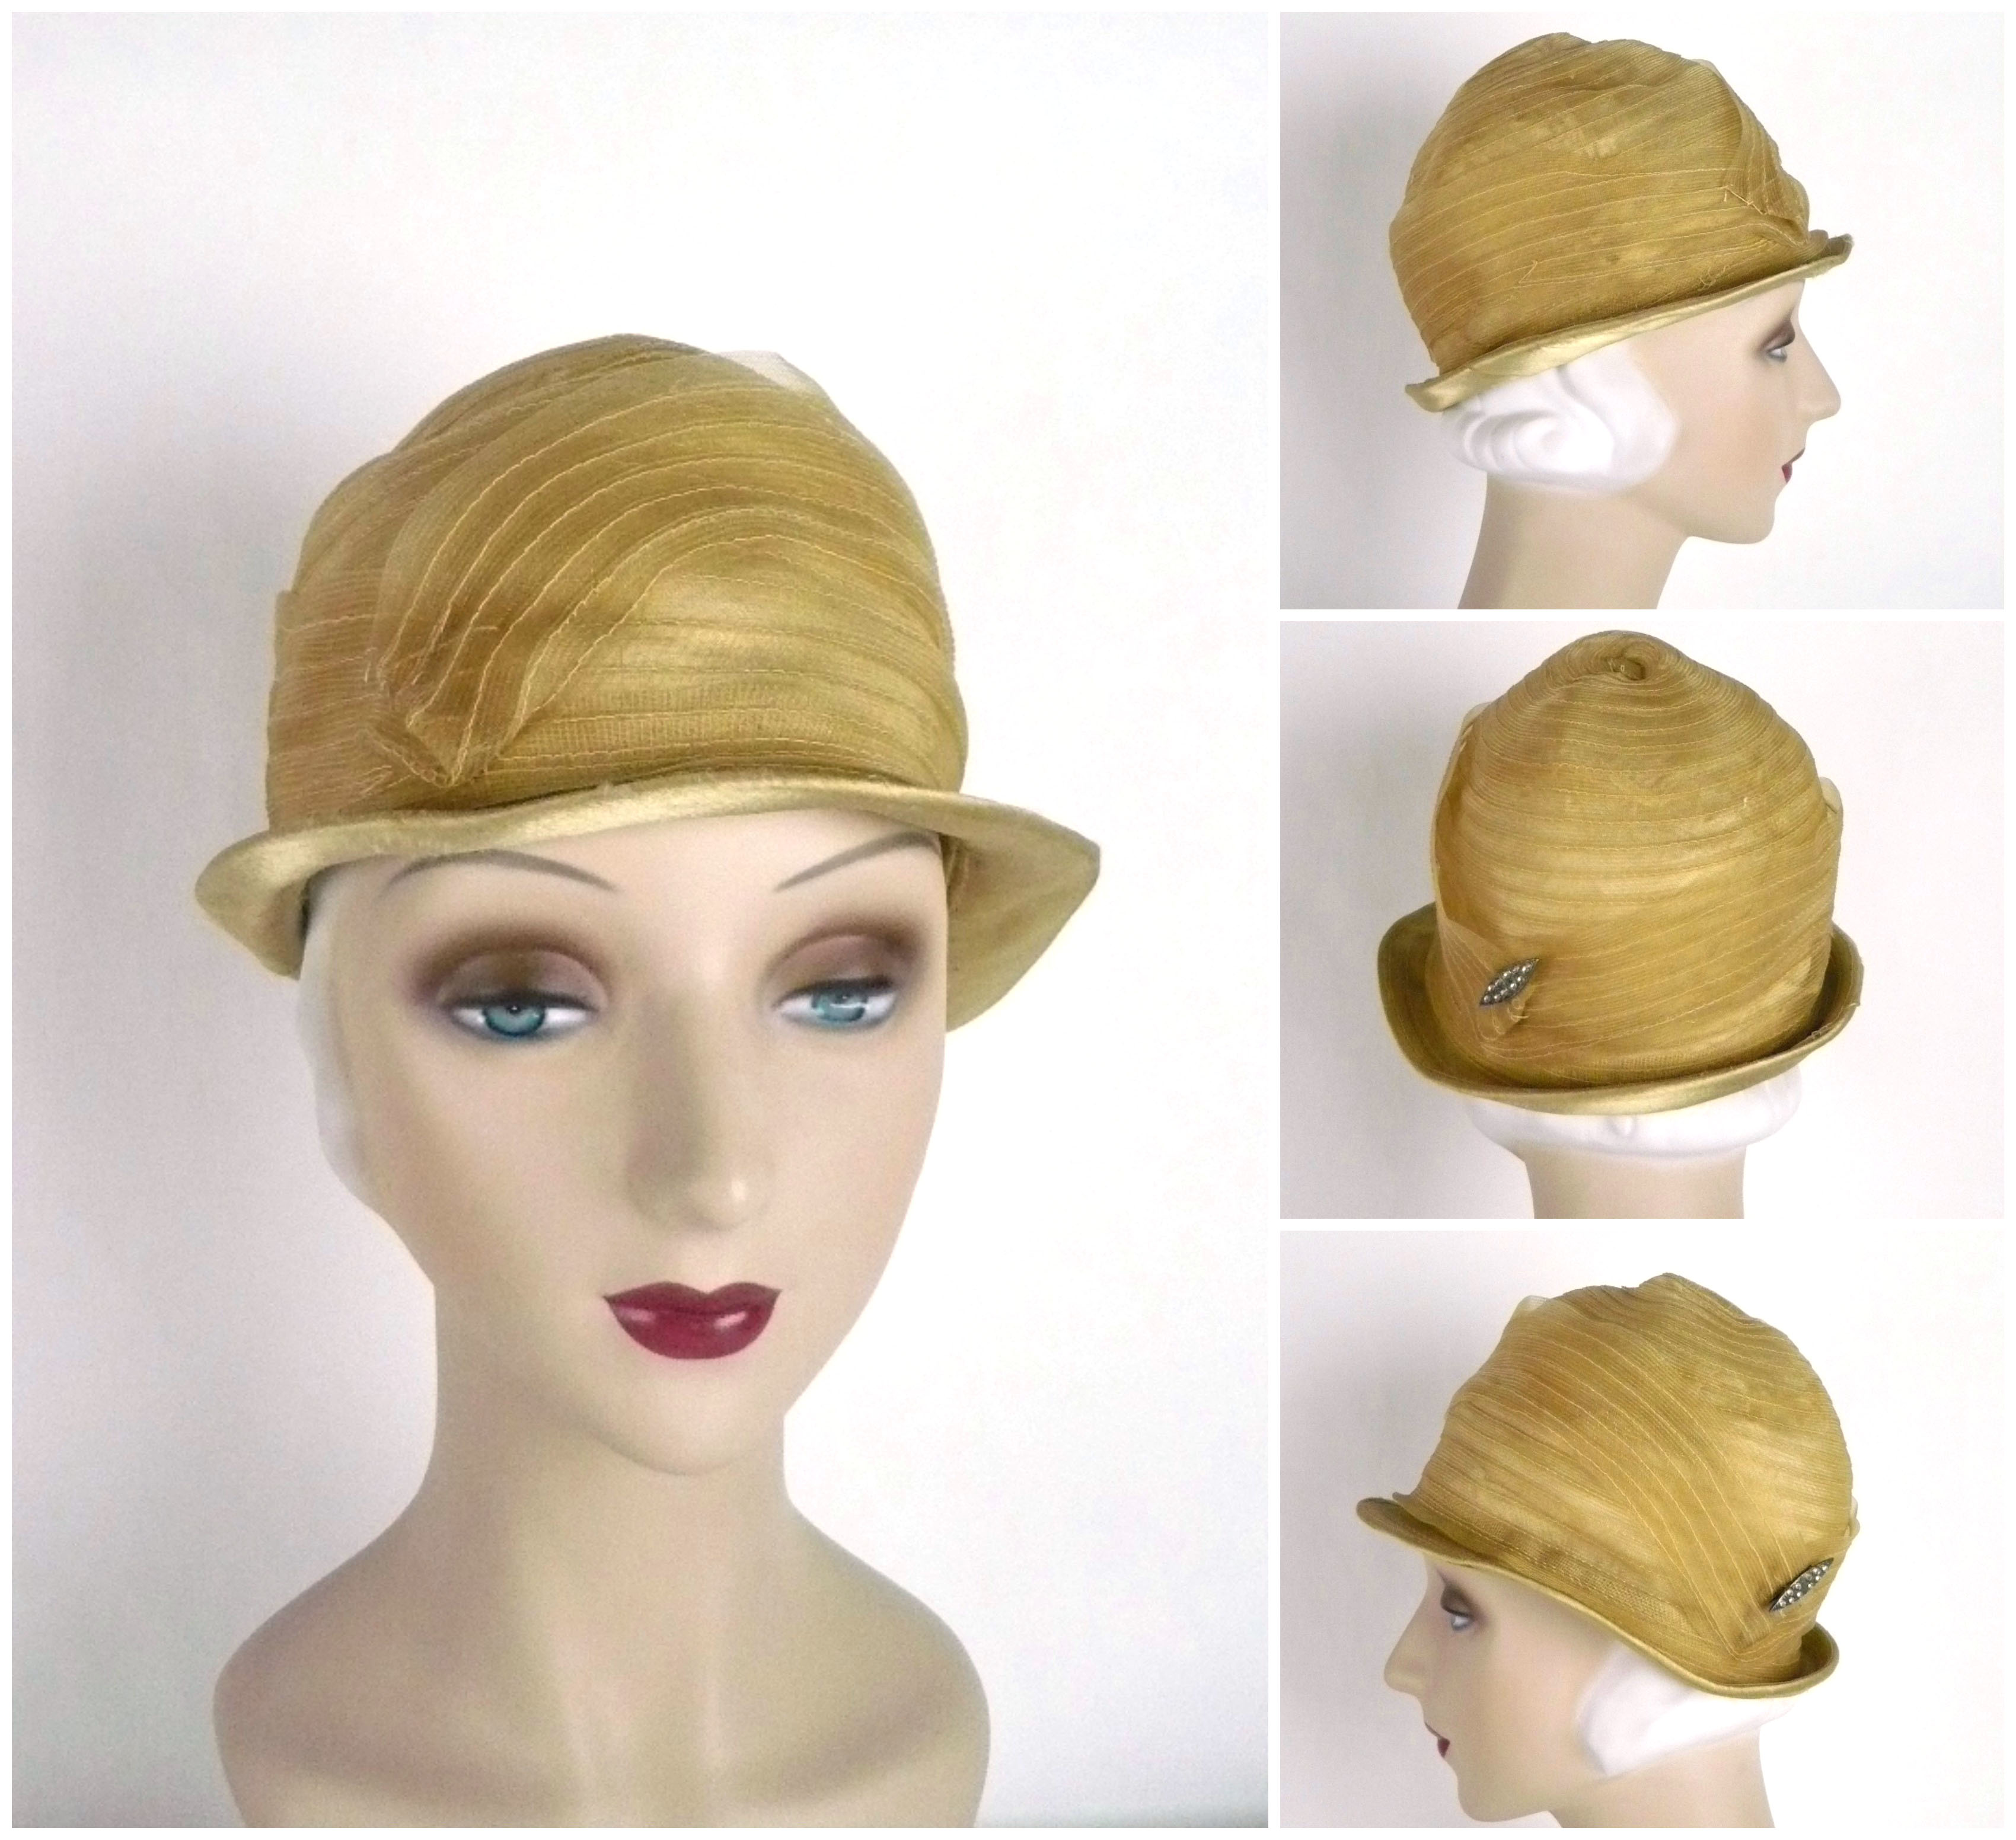 Ian Drummond Collection 1930s Hat 11